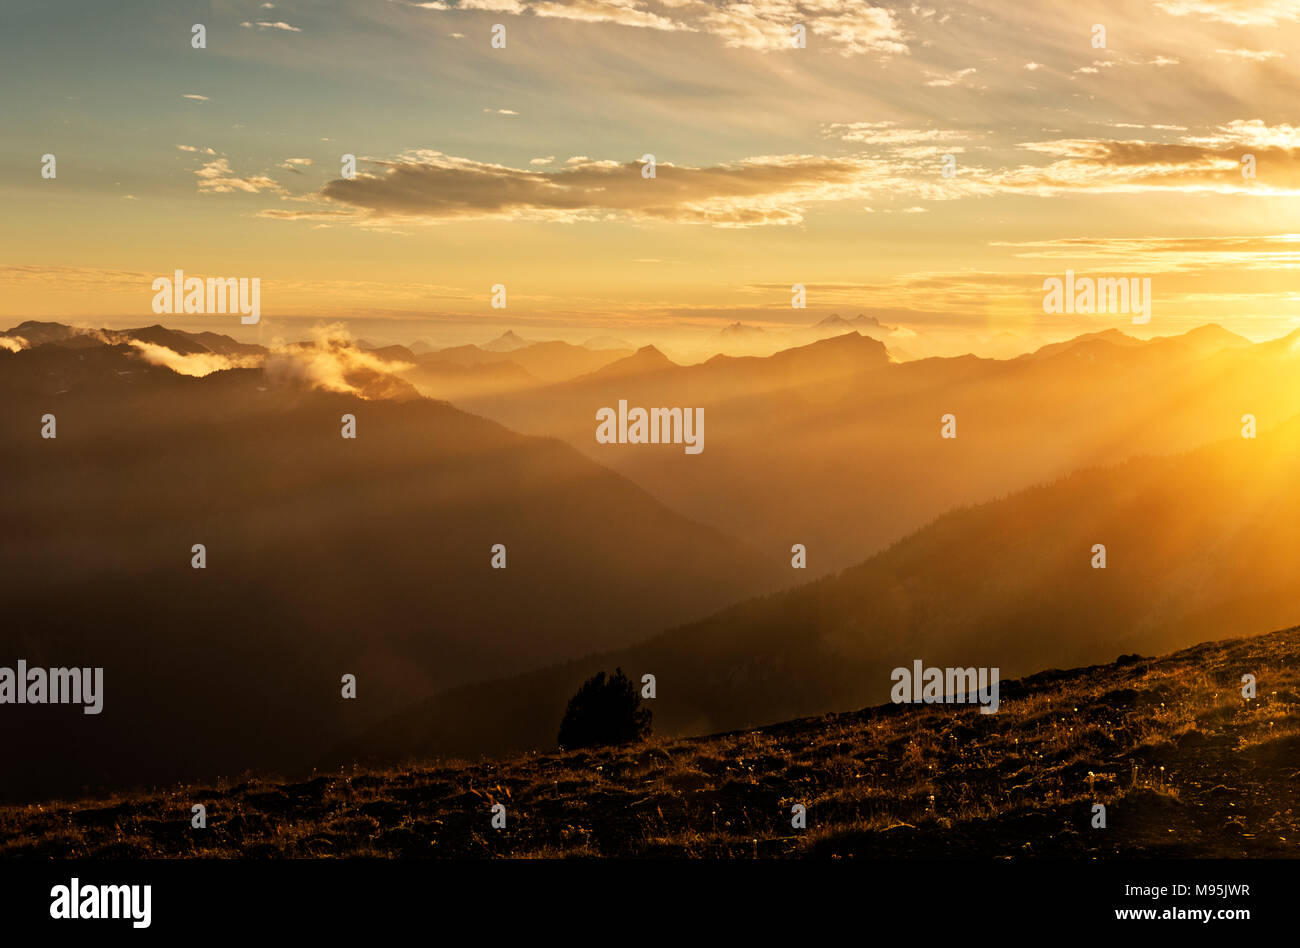 WA13908-00...WASHINGTON - Sunset from the high point between Constance Pass and Sunnybrook Meadows. Stock Photo